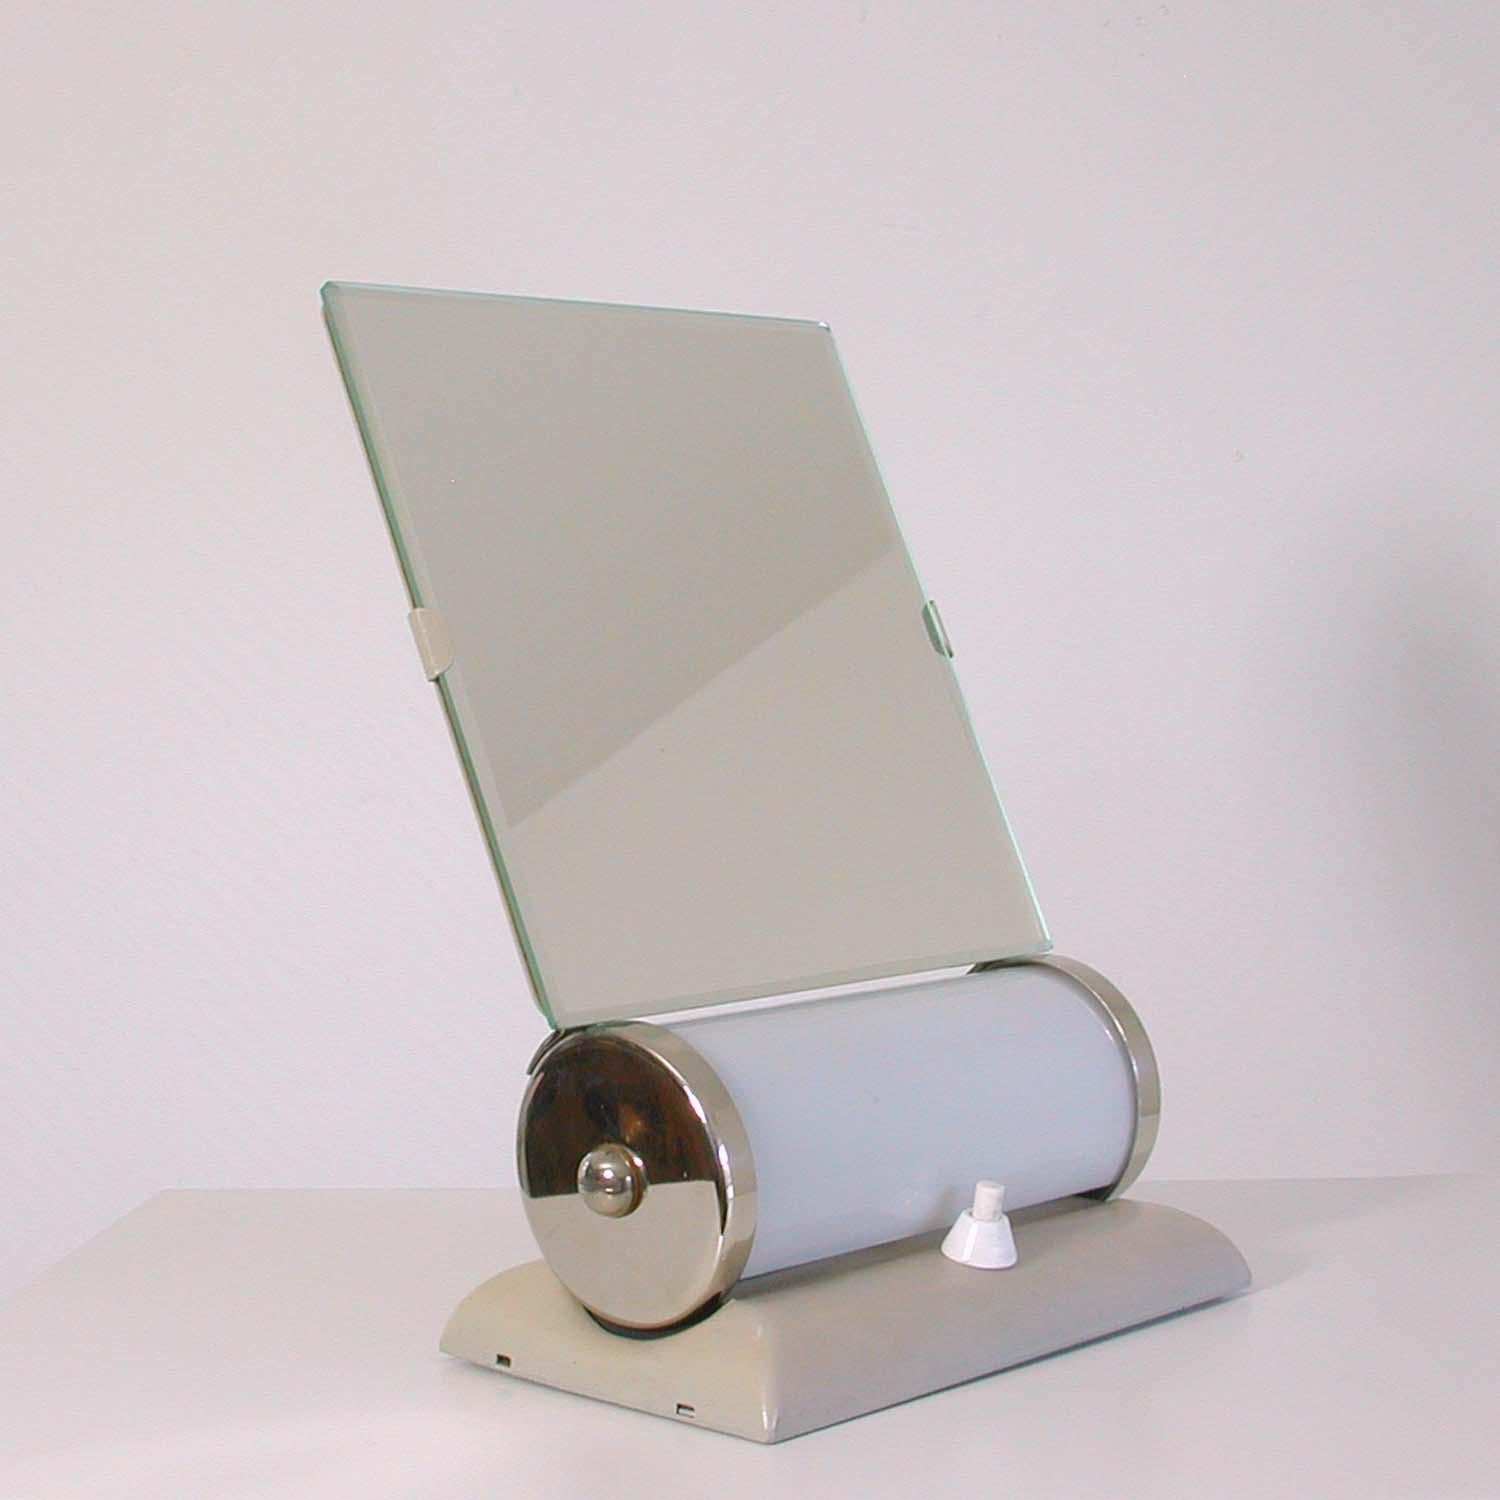 This Bauhaus inspired table mirror was designed and manufactured in Germany in the 1930s-1940s in the manner of Ruppelwerke, Gotha.

It has got a cream lacquered base, an adjustable bevelled mirror and an opaline lamp shade. All other parts are